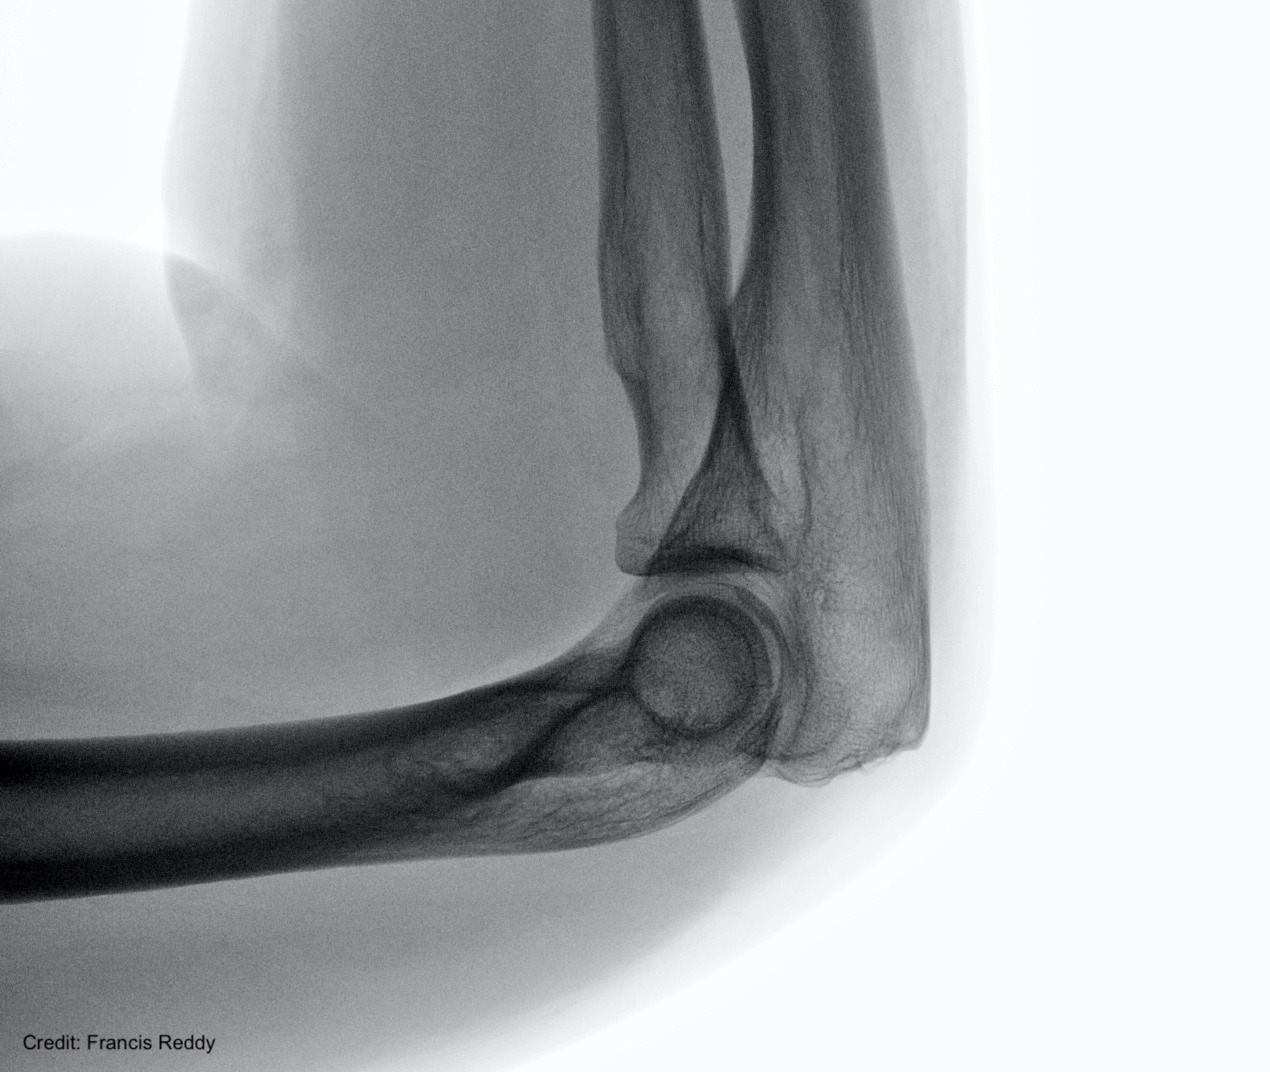 X-ray image of a human elbow. Denser materials, like bone, stop more X-rays than skin and muscle.